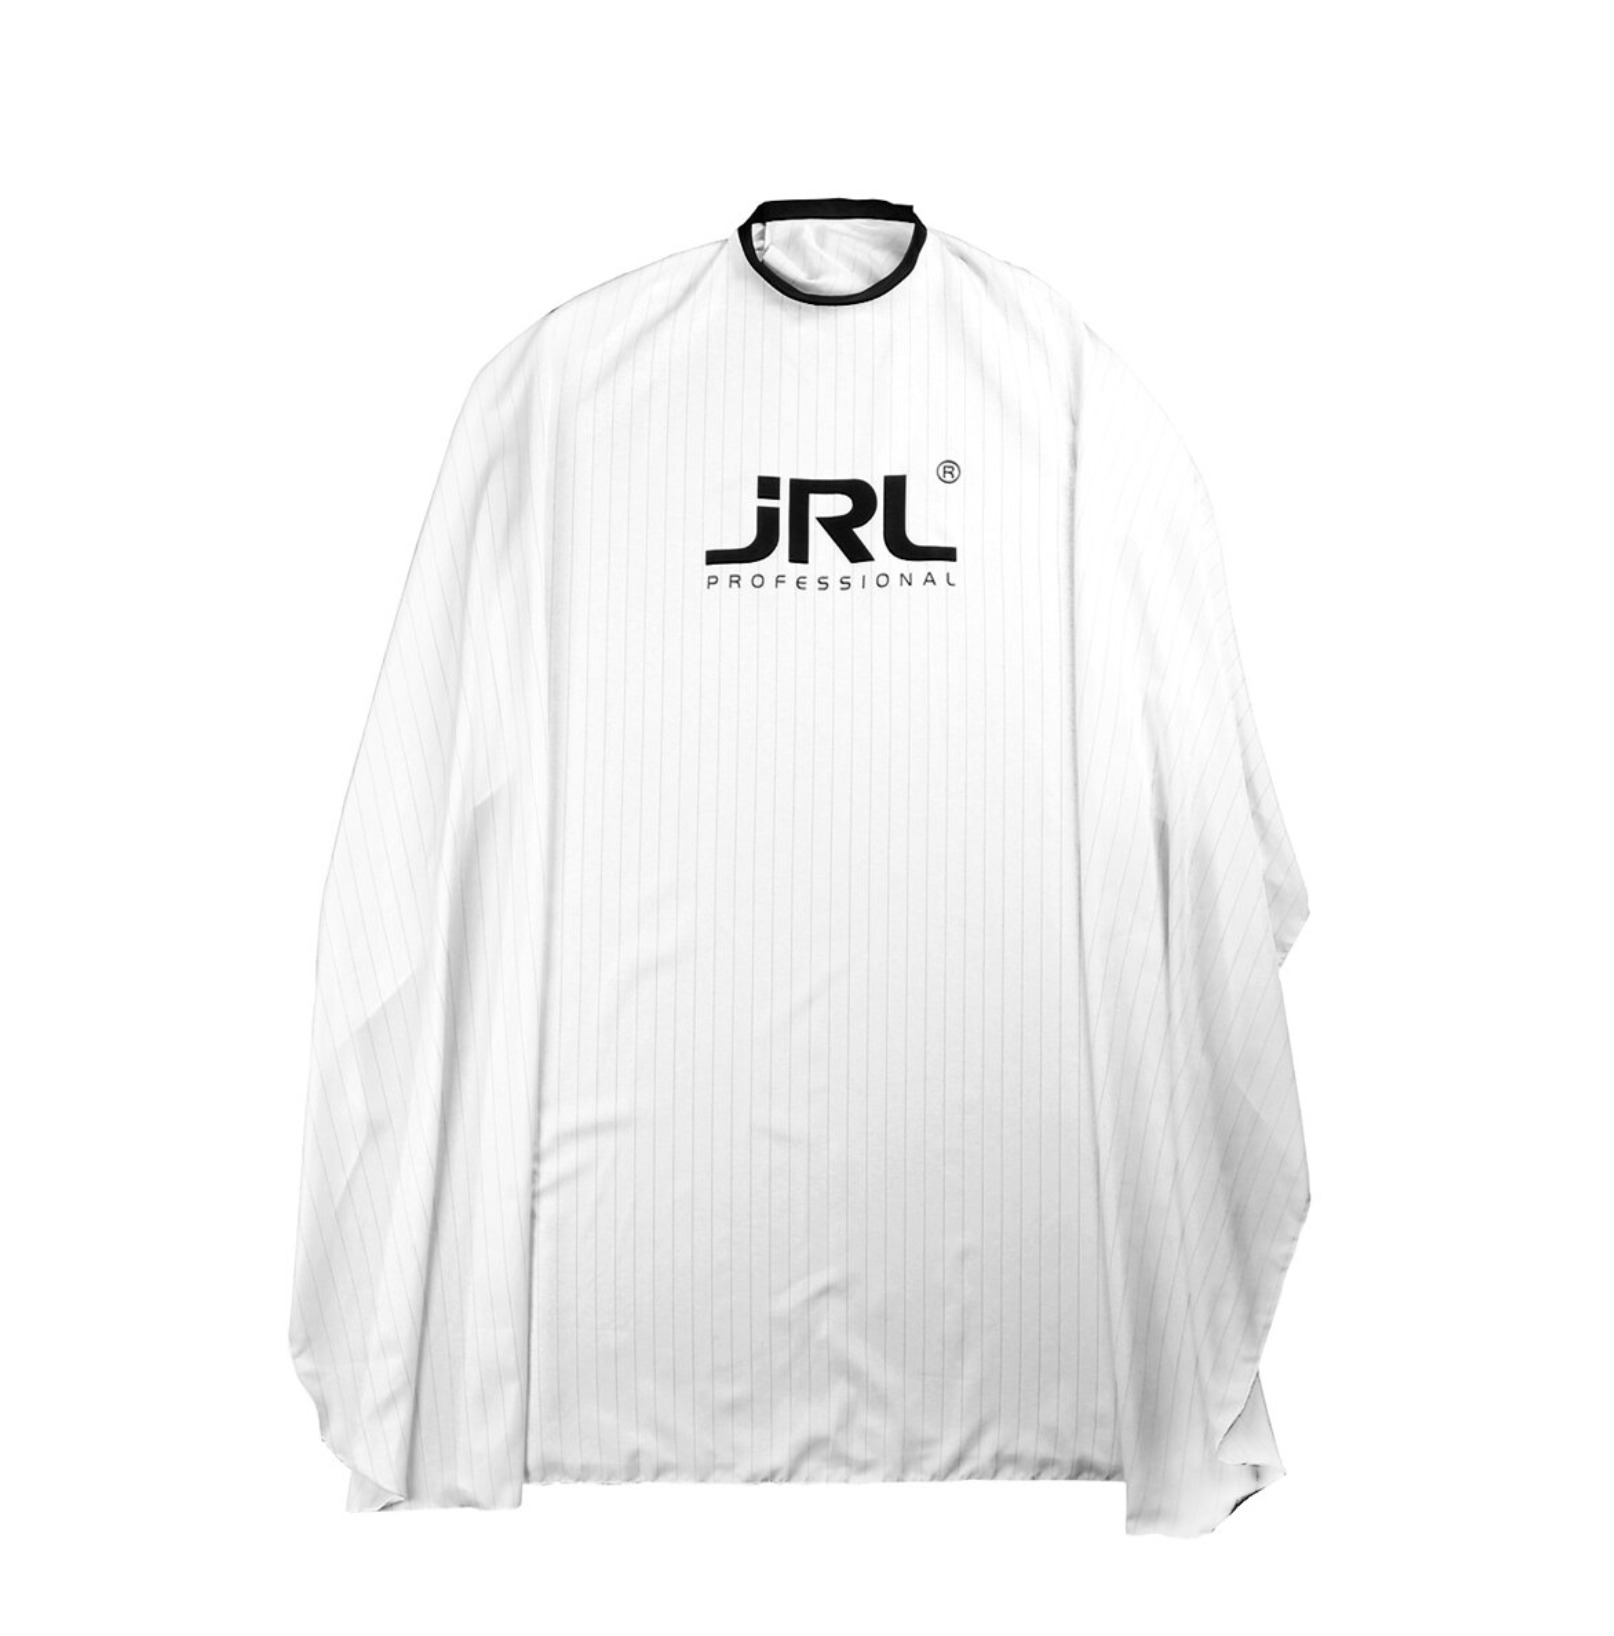 JRL Professional Cutting Cape white with Black Pin Strips